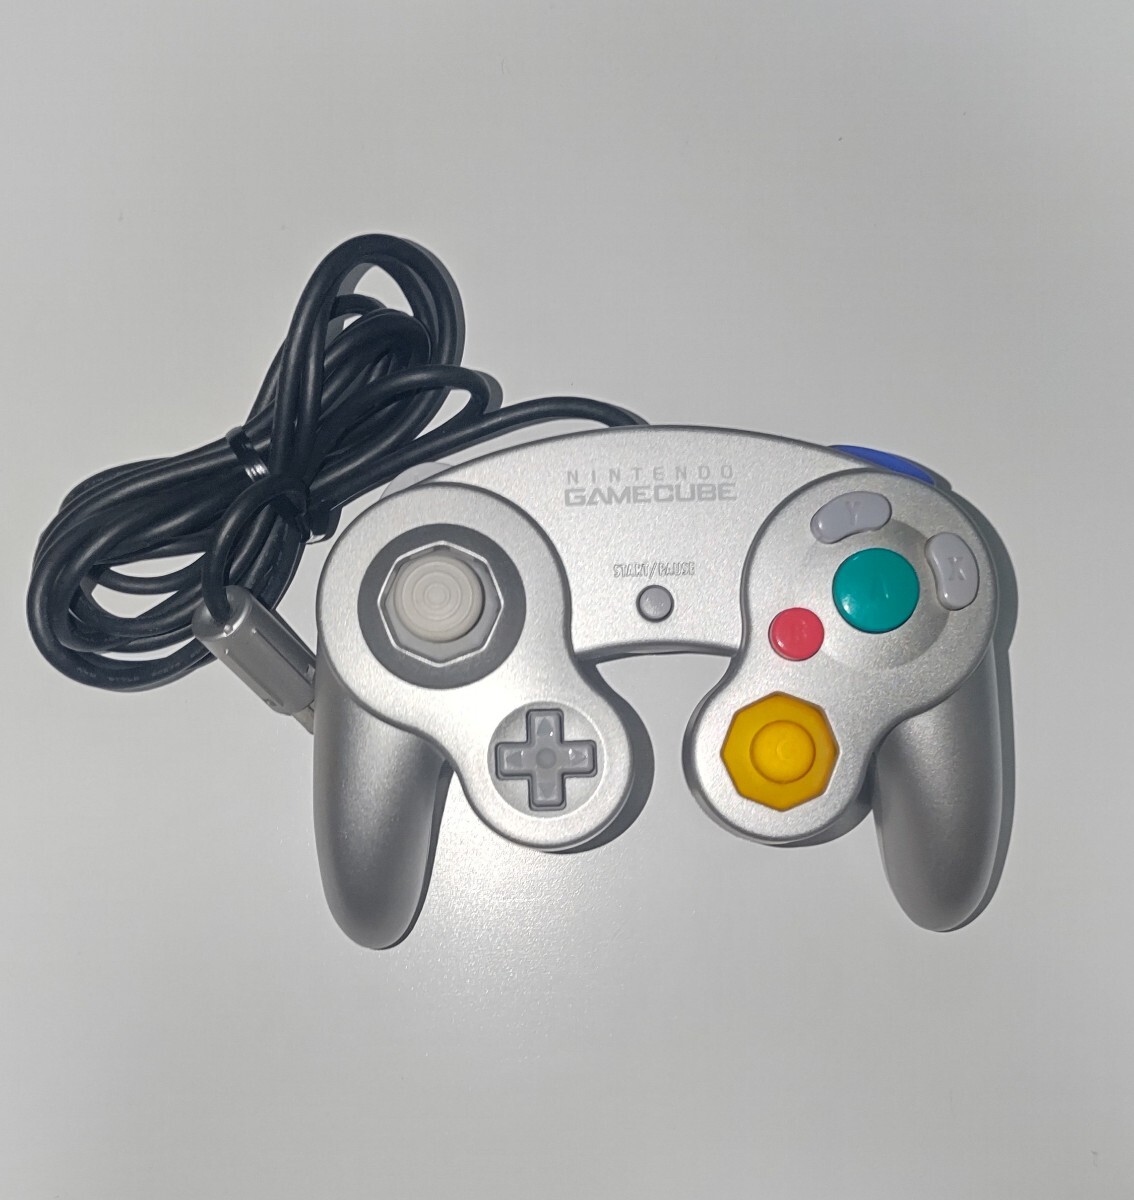  genuine products Nintendo Game Cube body controller silver Nintendo GameCube Controller GC